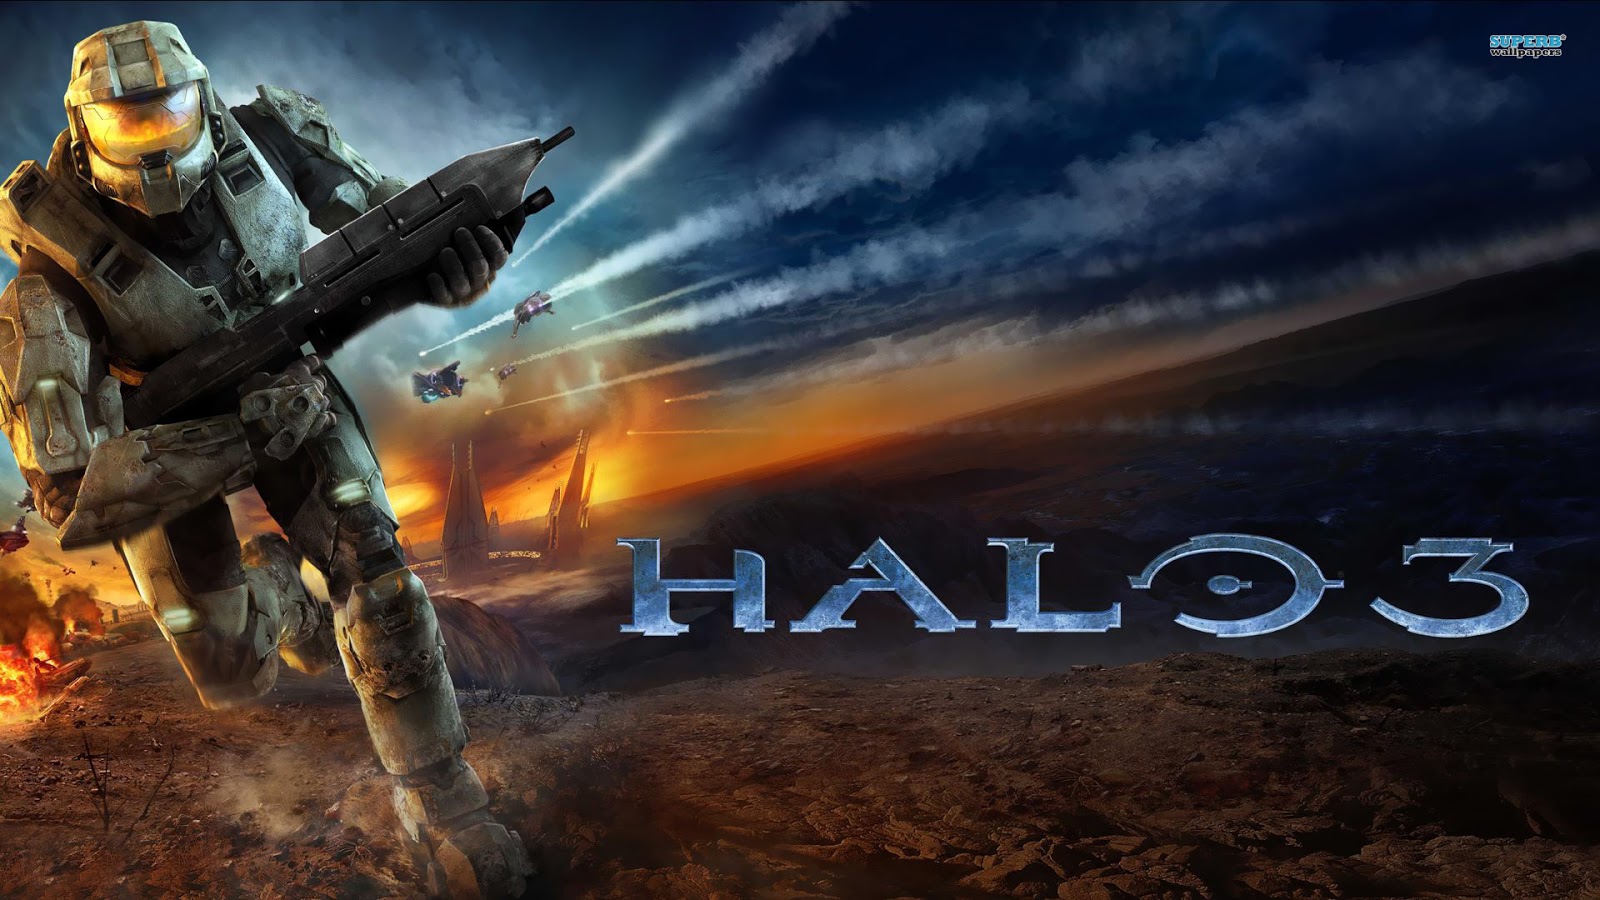 halo wallpaper hd,action adventure game,pc game,strategy video game,shooter game,games